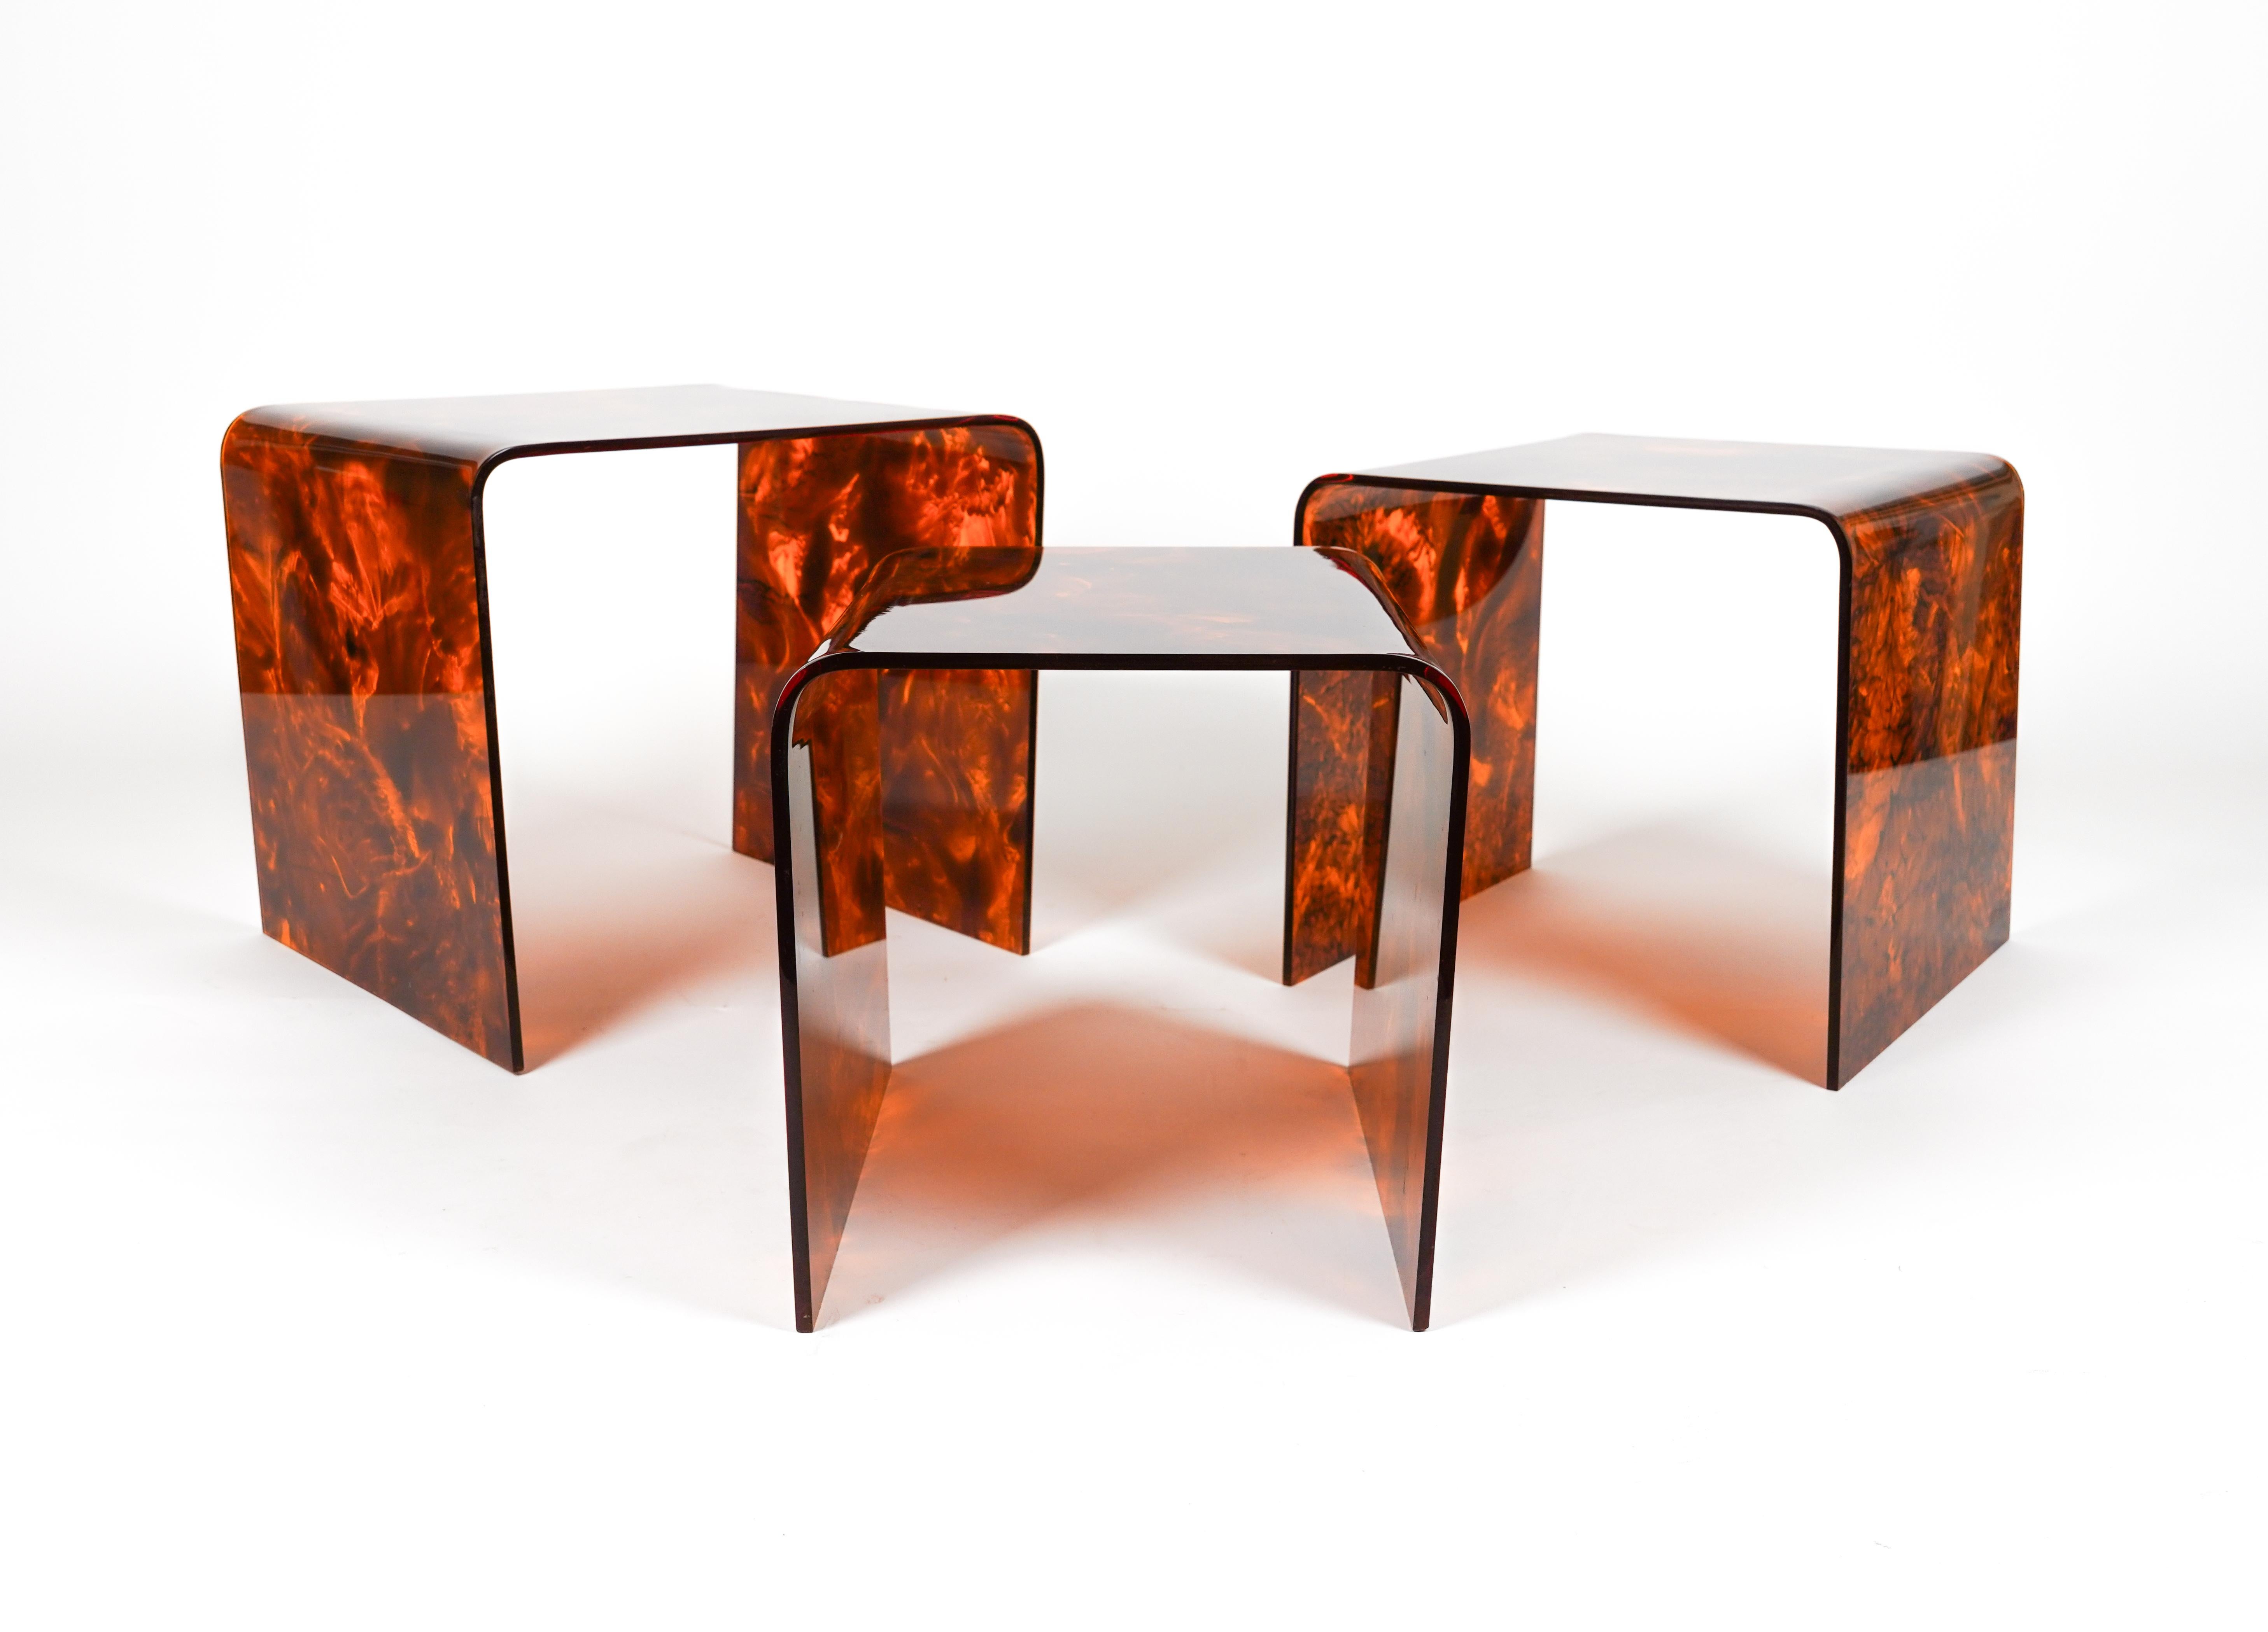 Plexiglass Set of 3 Nesting Tables in Lucite Faux Tortoiseshell Christian Dior, Italy 1970s For Sale